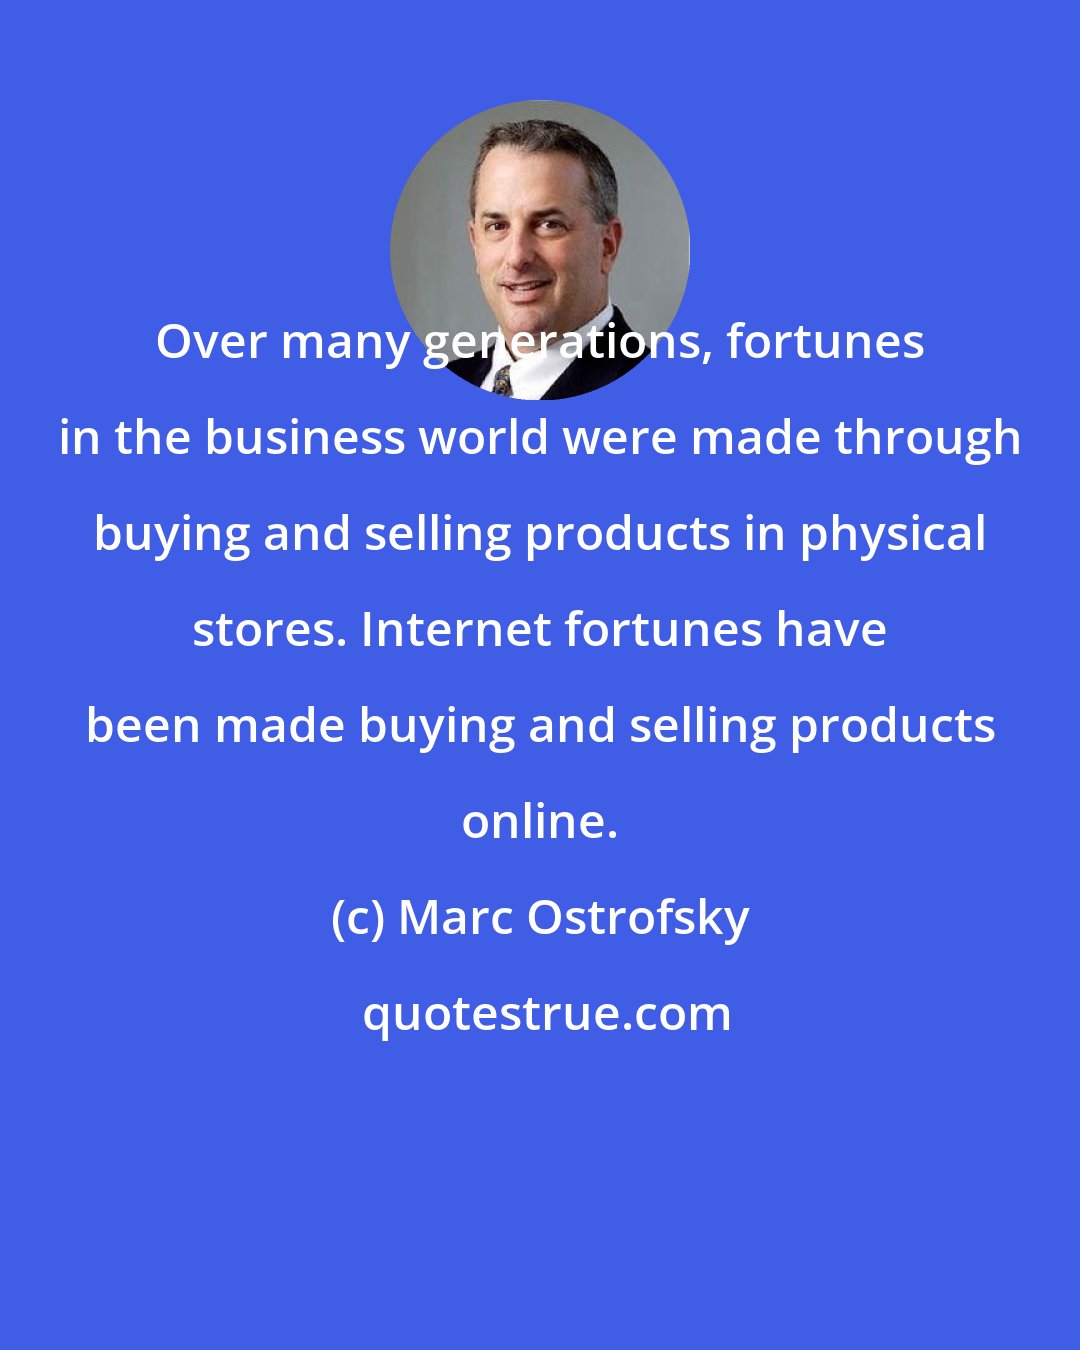 Marc Ostrofsky: Over many generations, fortunes in the business world were made through buying and selling products in physical stores. Internet fortunes have been made buying and selling products online.